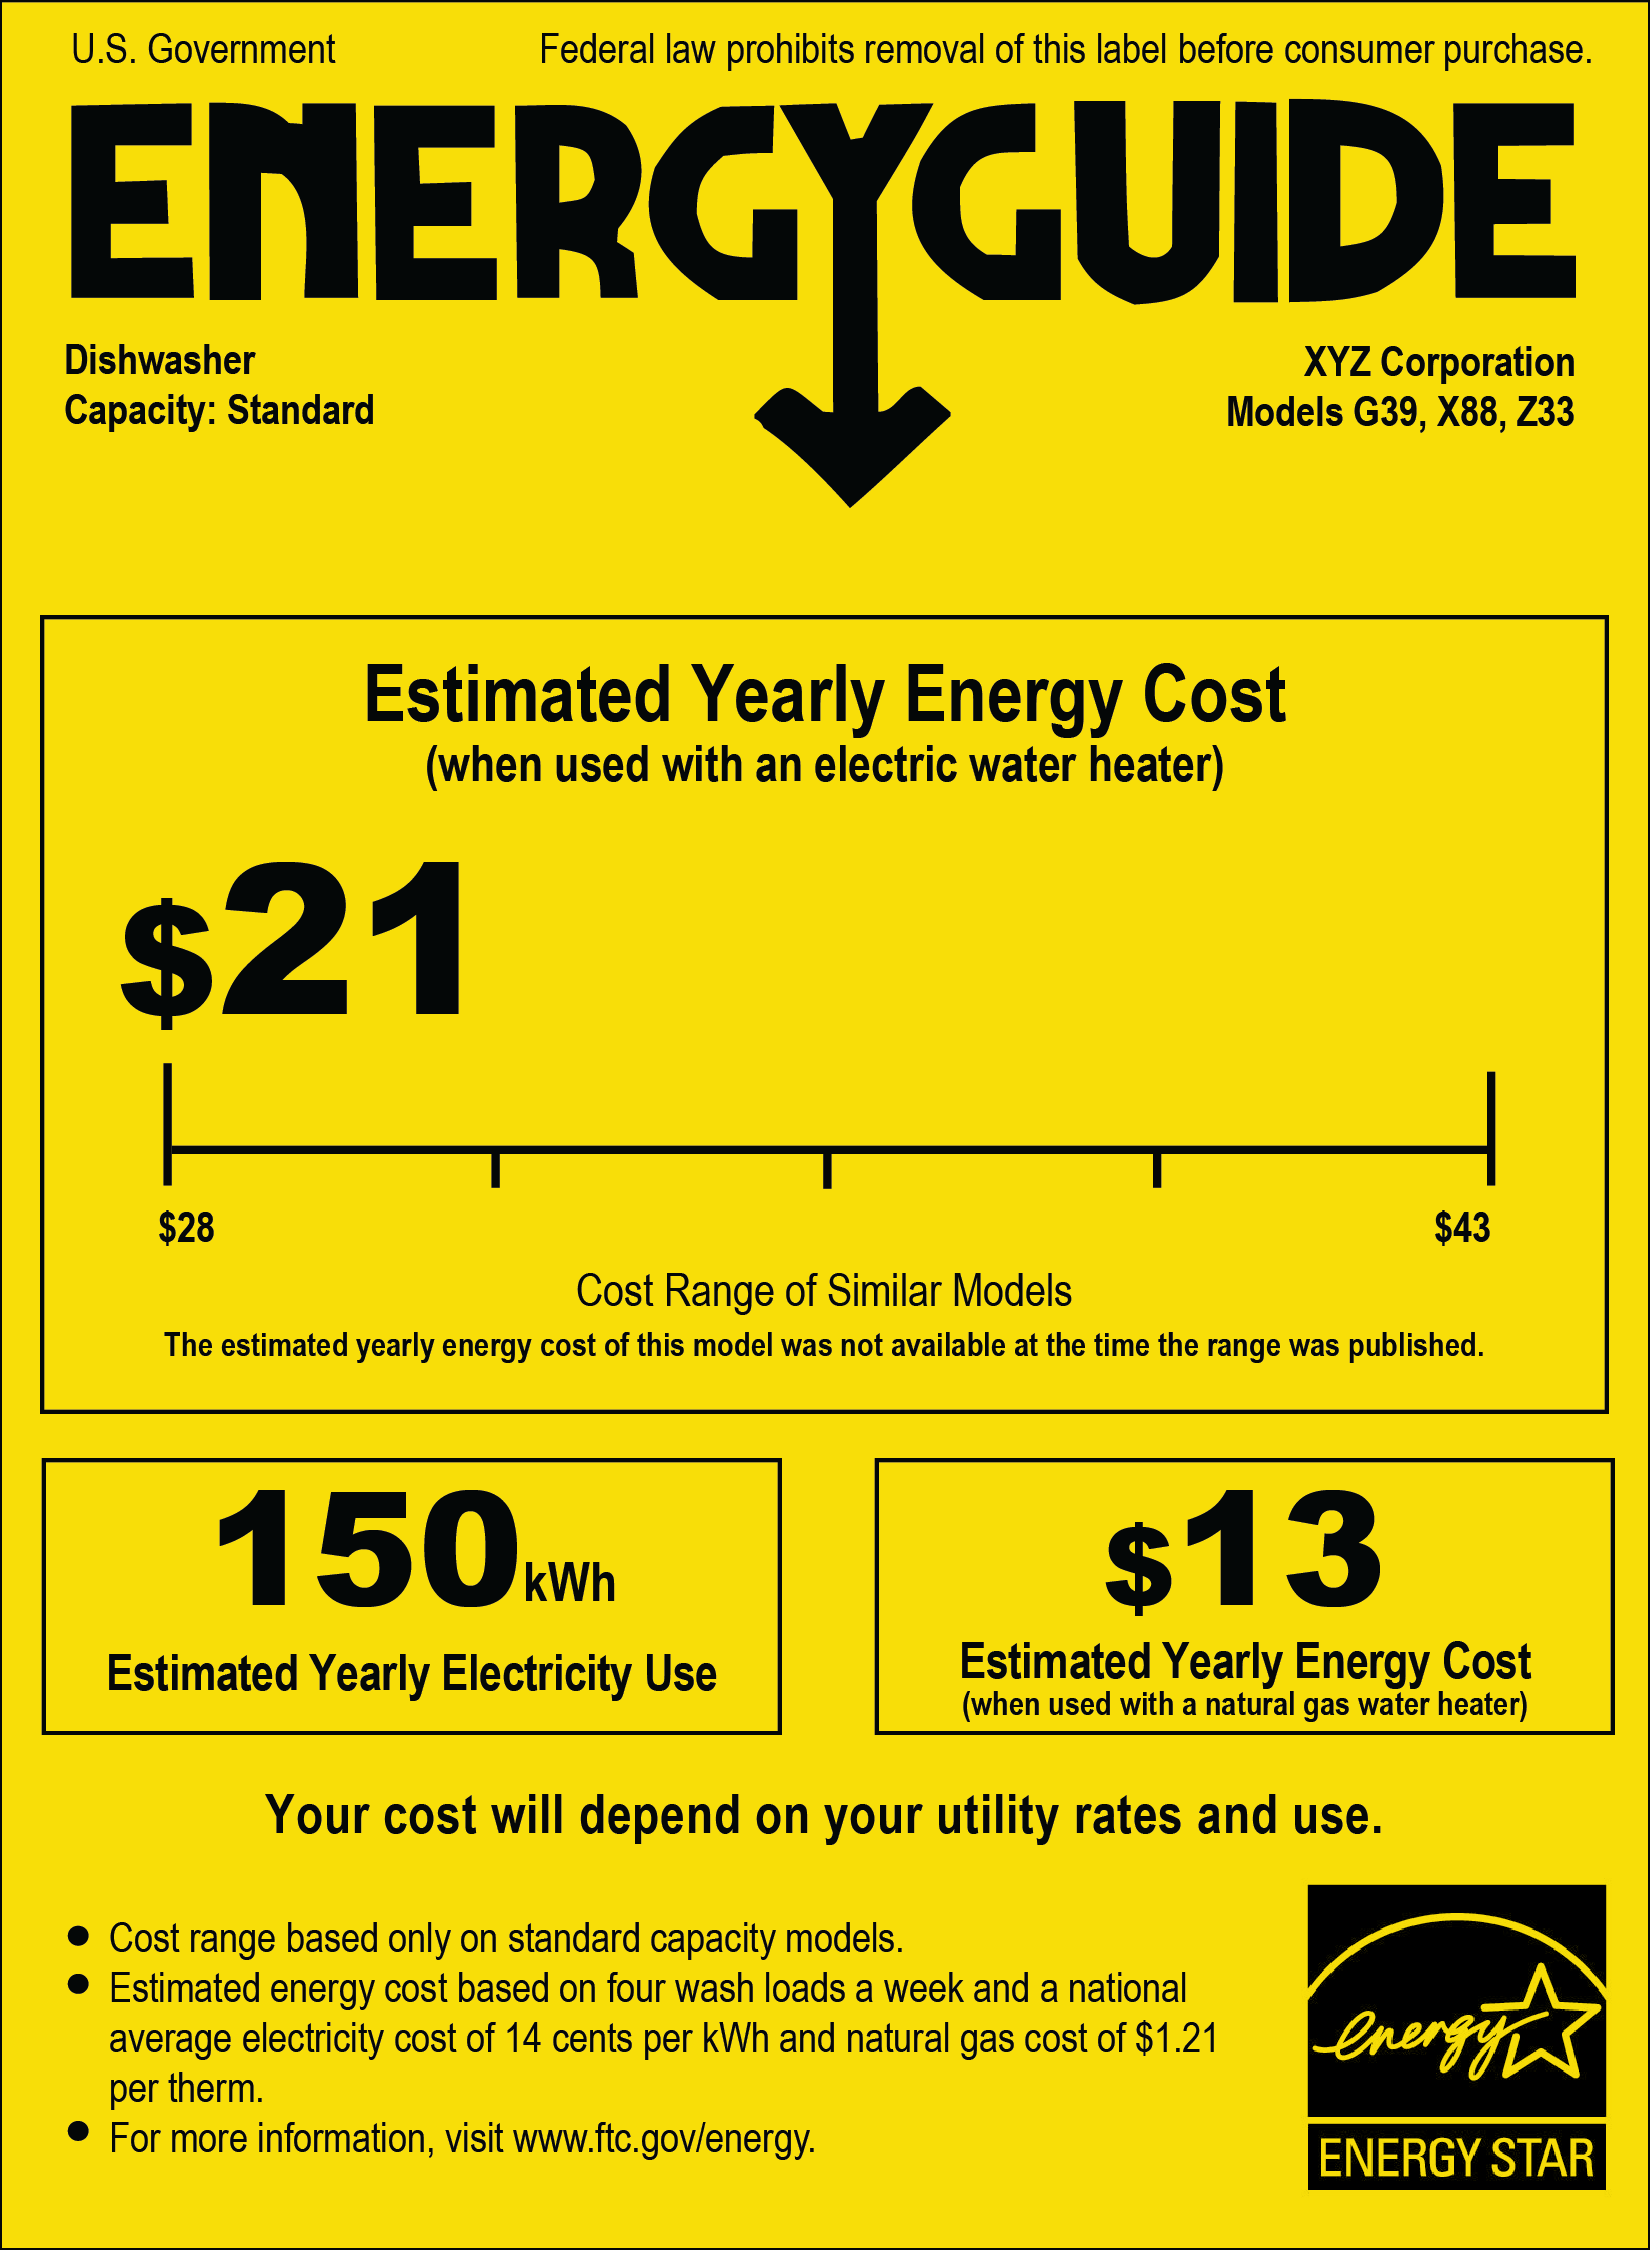 how-to-use-the-energyguide-label-to-shop-for-home-appliances-consumer